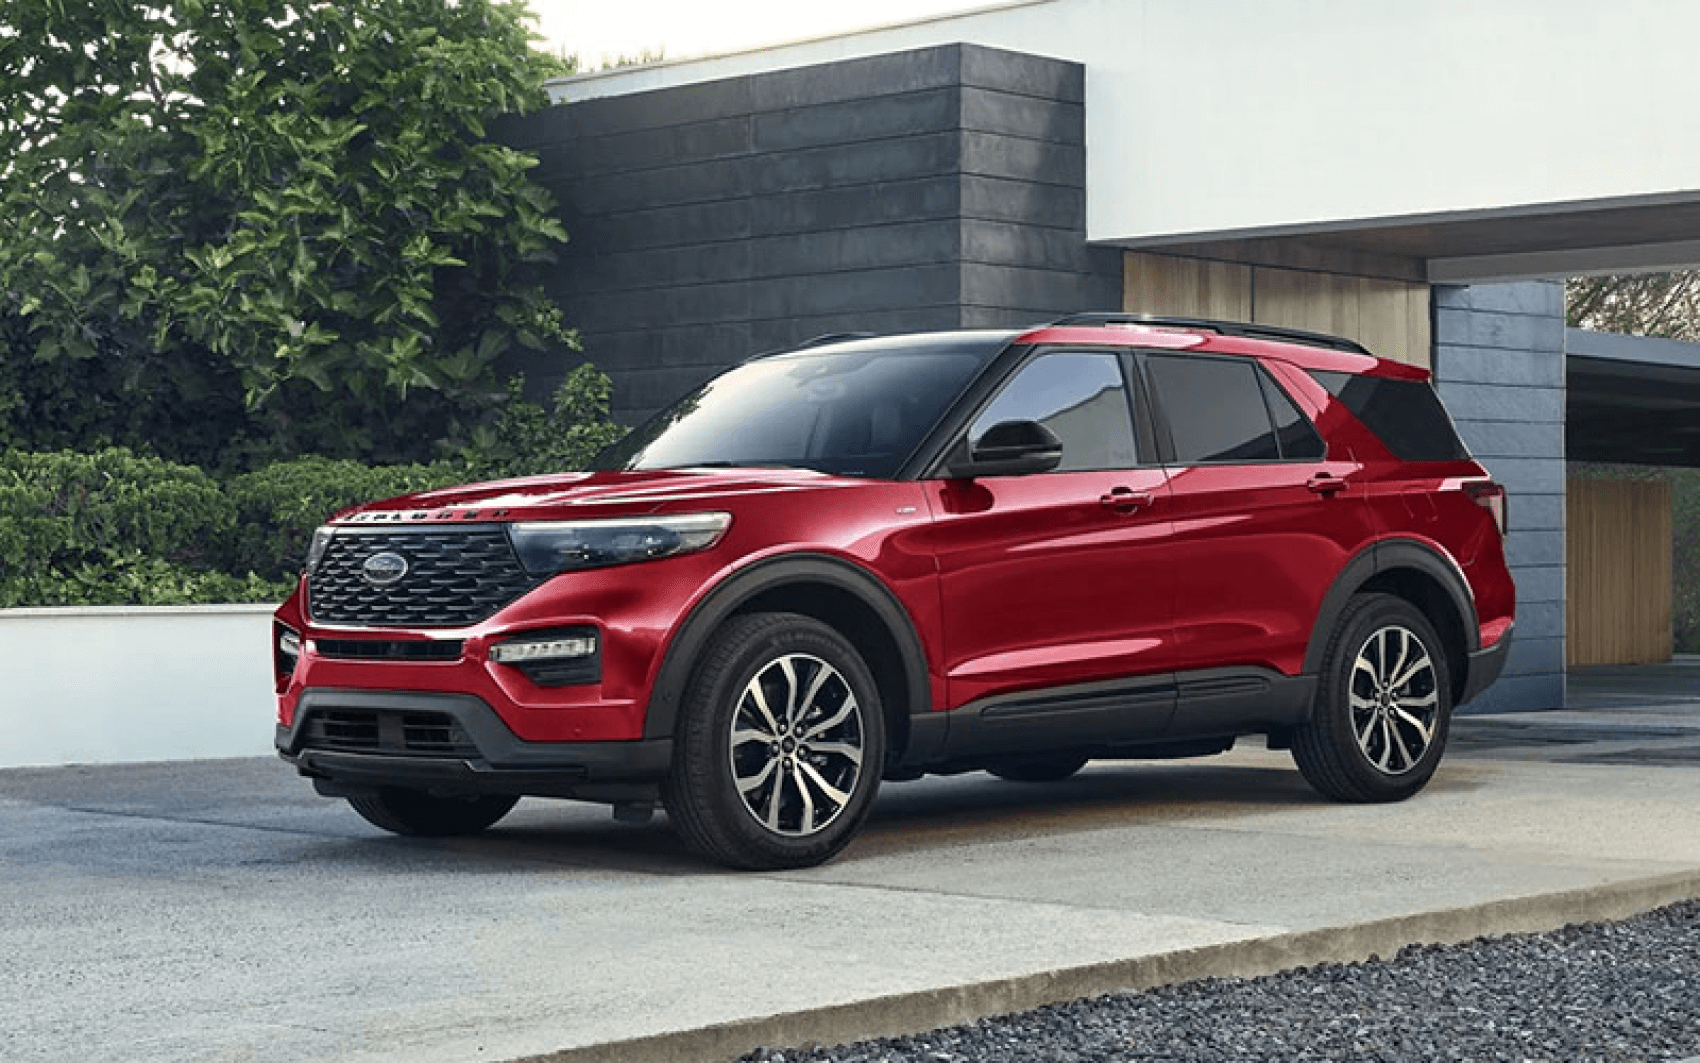 Ford Explorer in Driveway